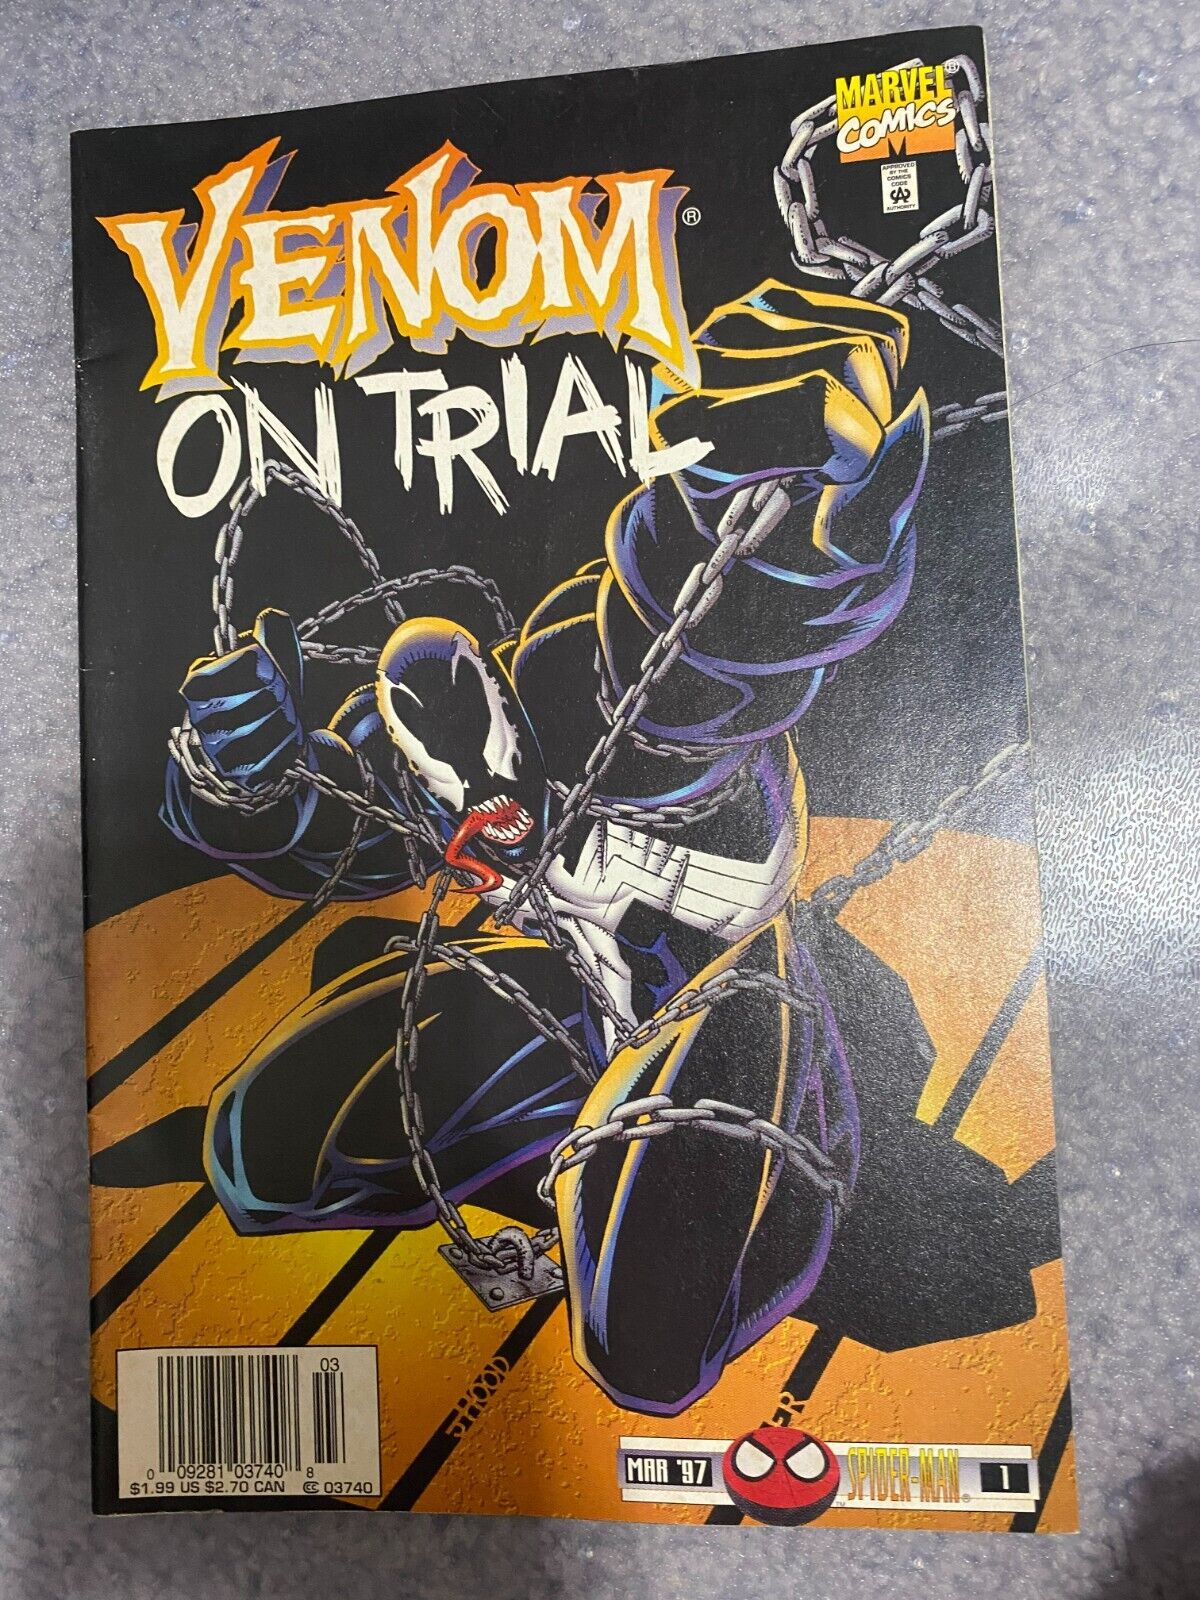 Marvel Comic. Venom: On Trial. 1997. Vol 1 of 3. Law and Order.